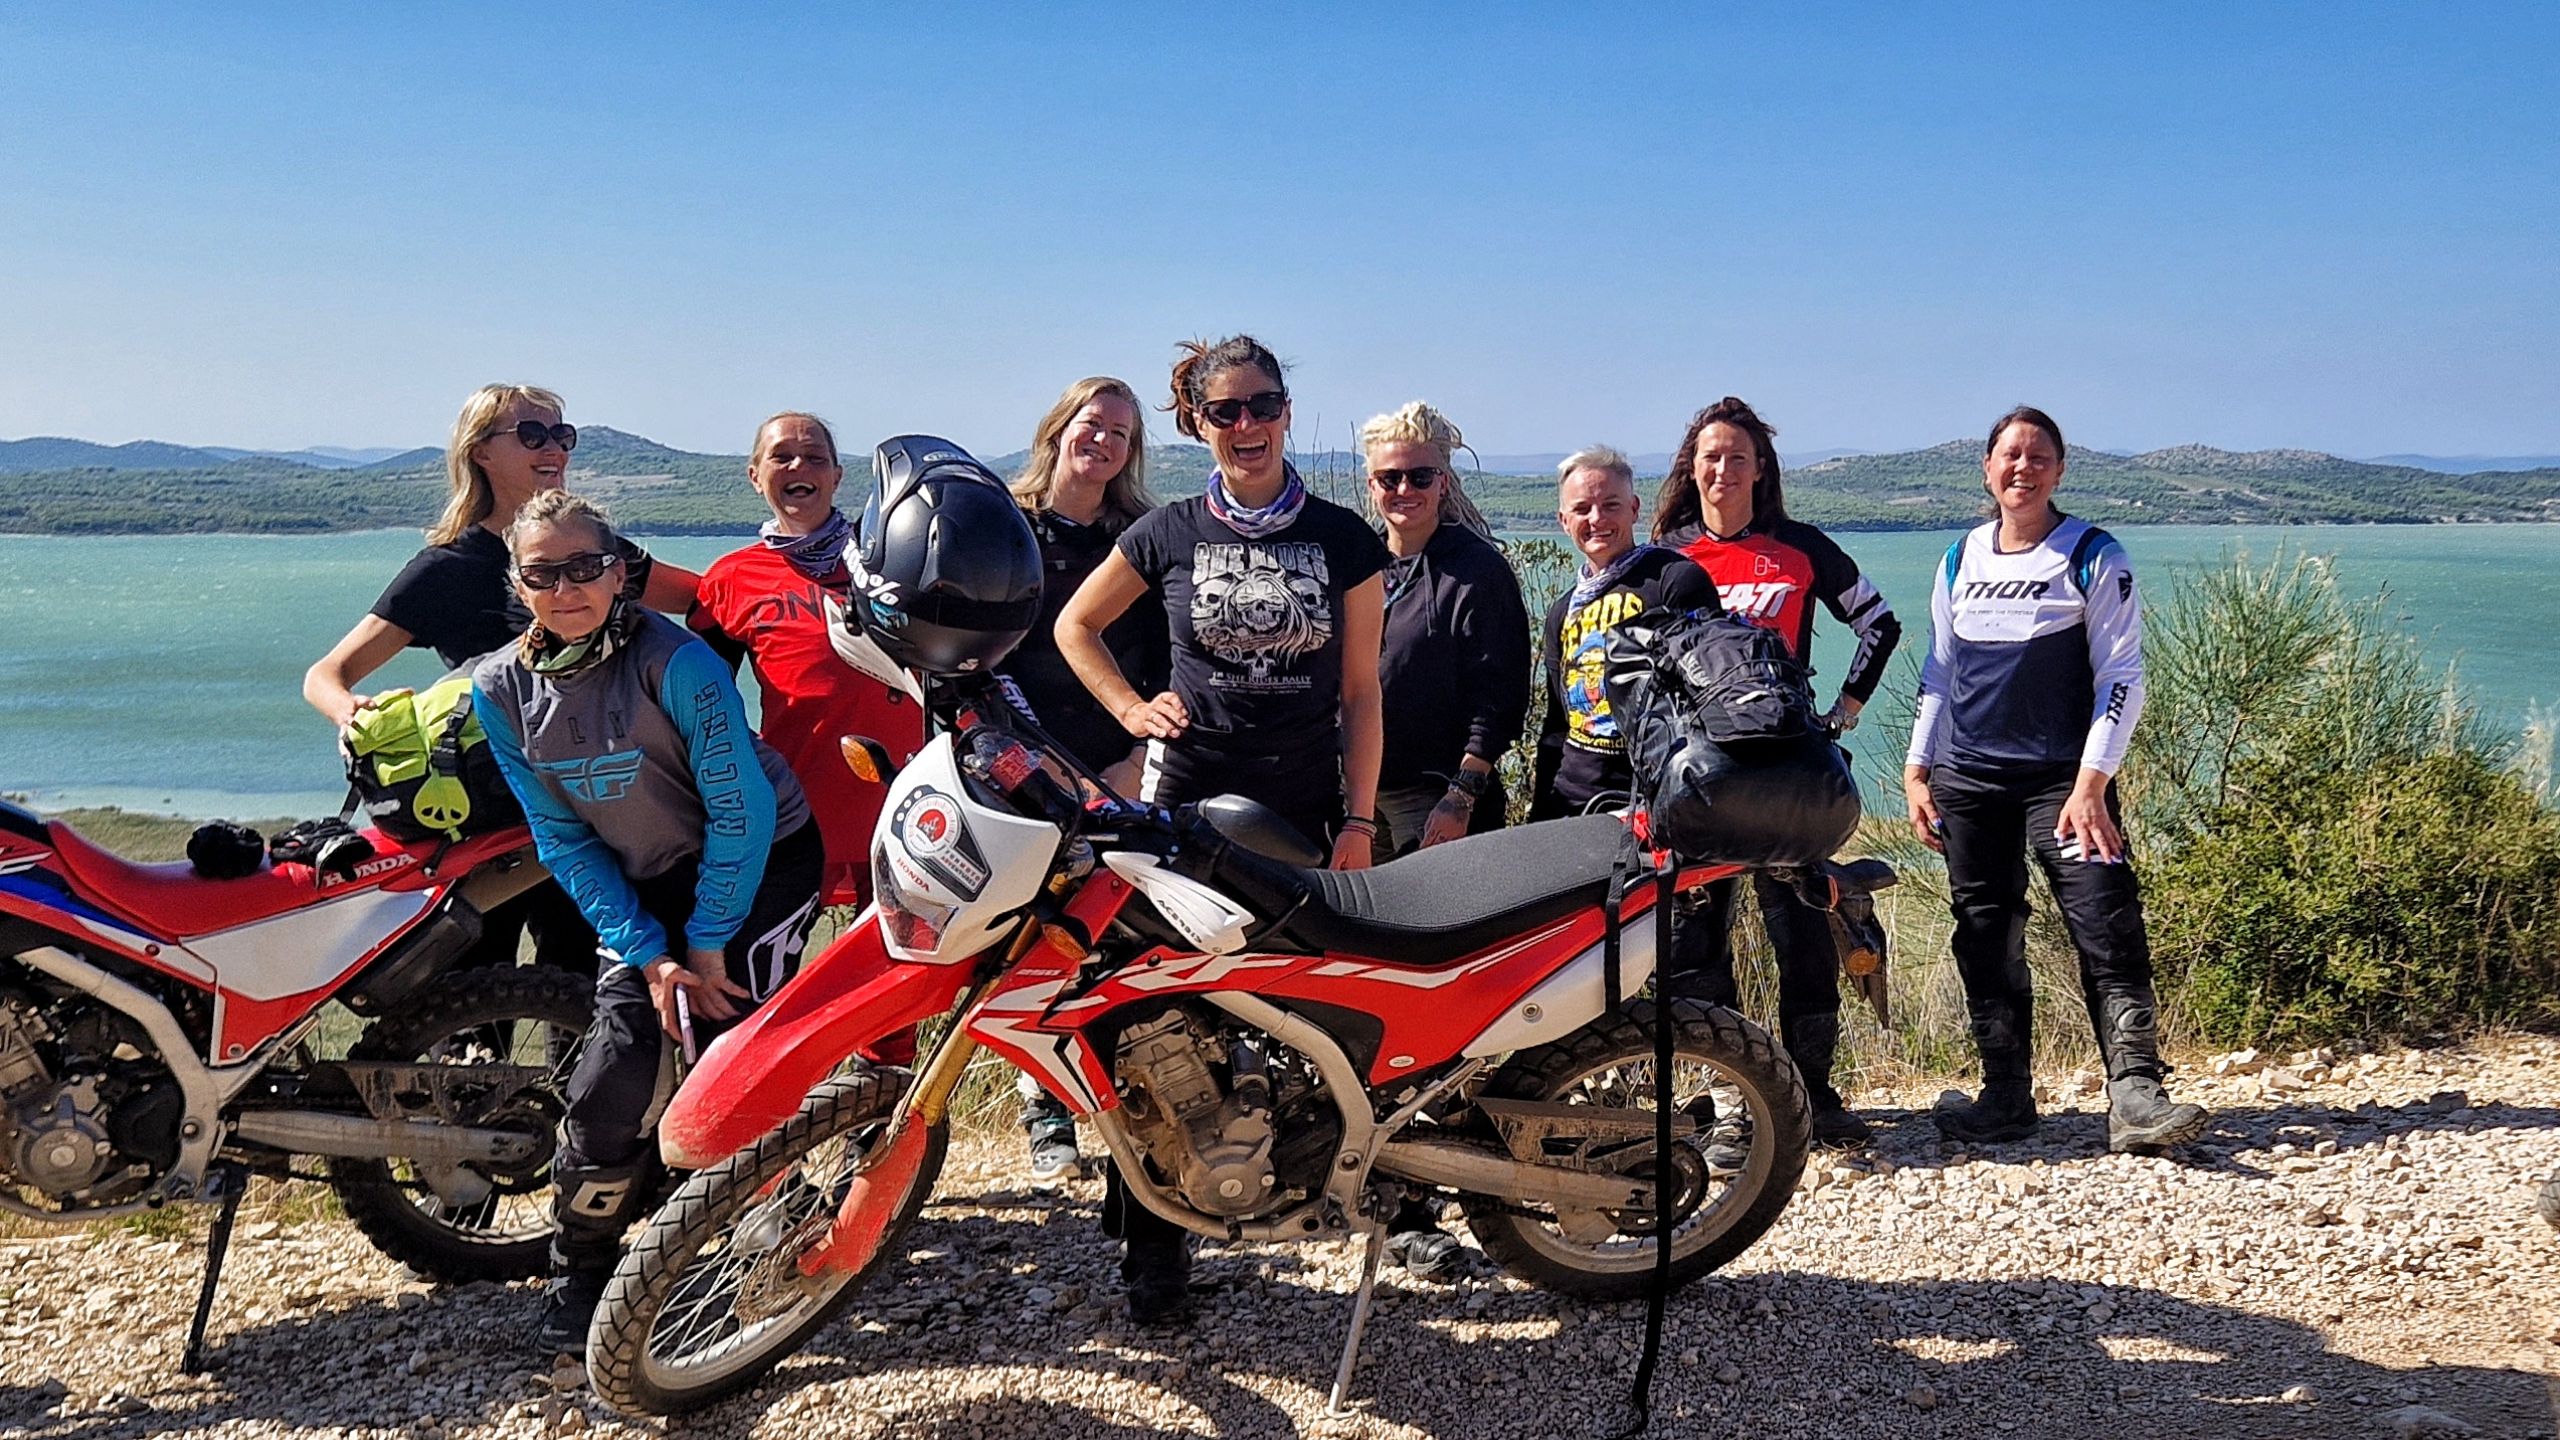 Funmoto ADVentures sightseeing 4 day only womens motorcycle tour in Croatia woken riders